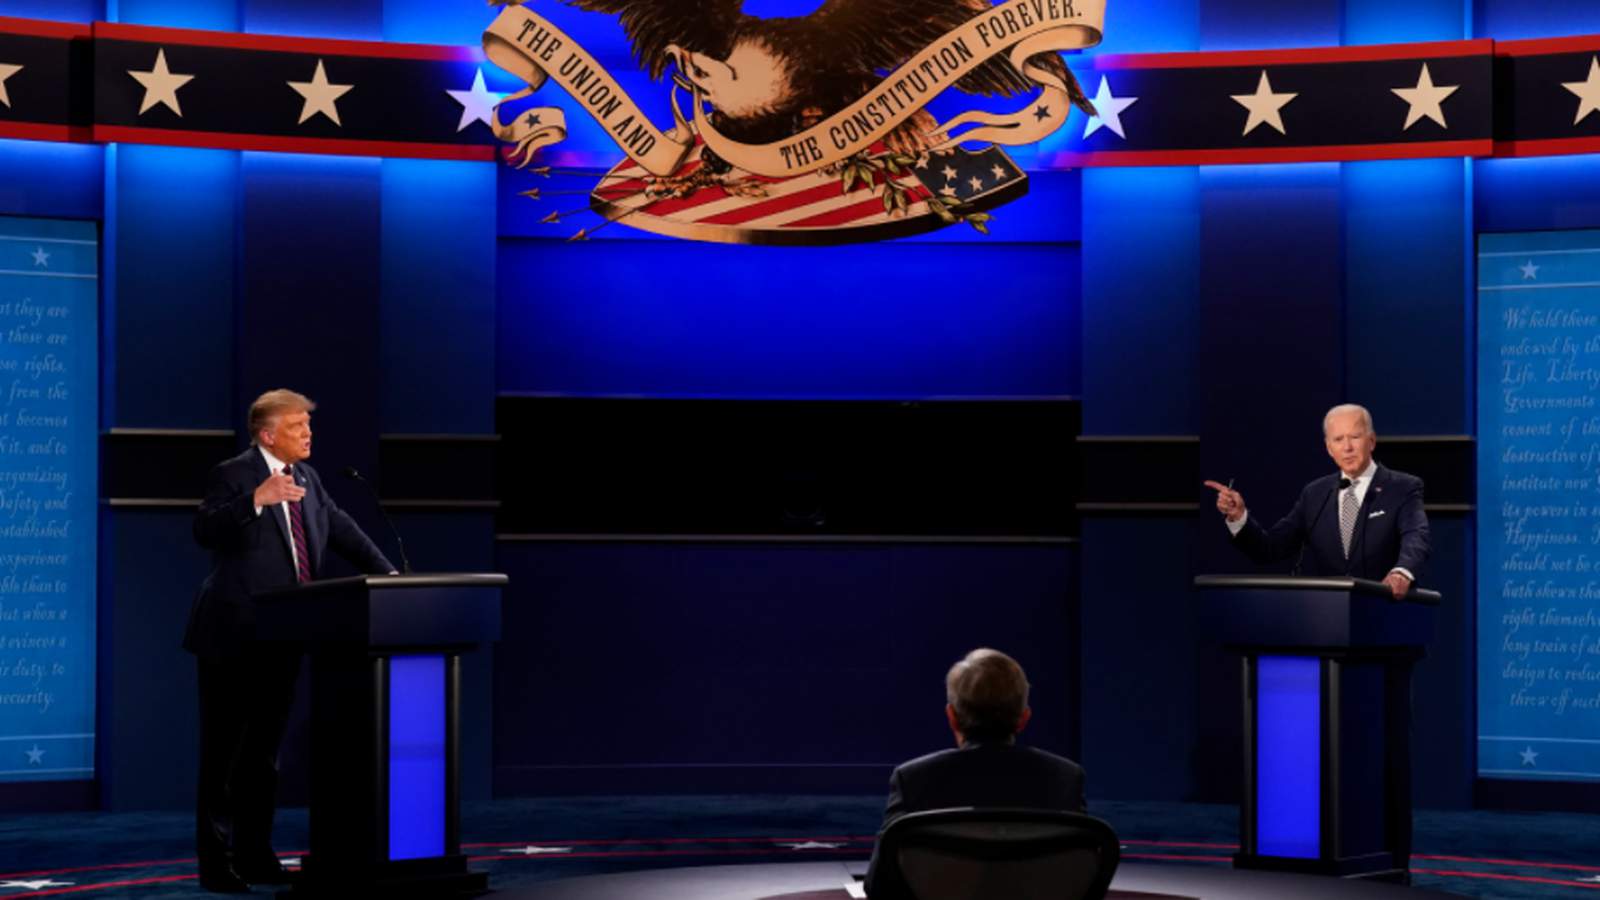 Central Florida political expert said he’s never seen a presidential debate like this